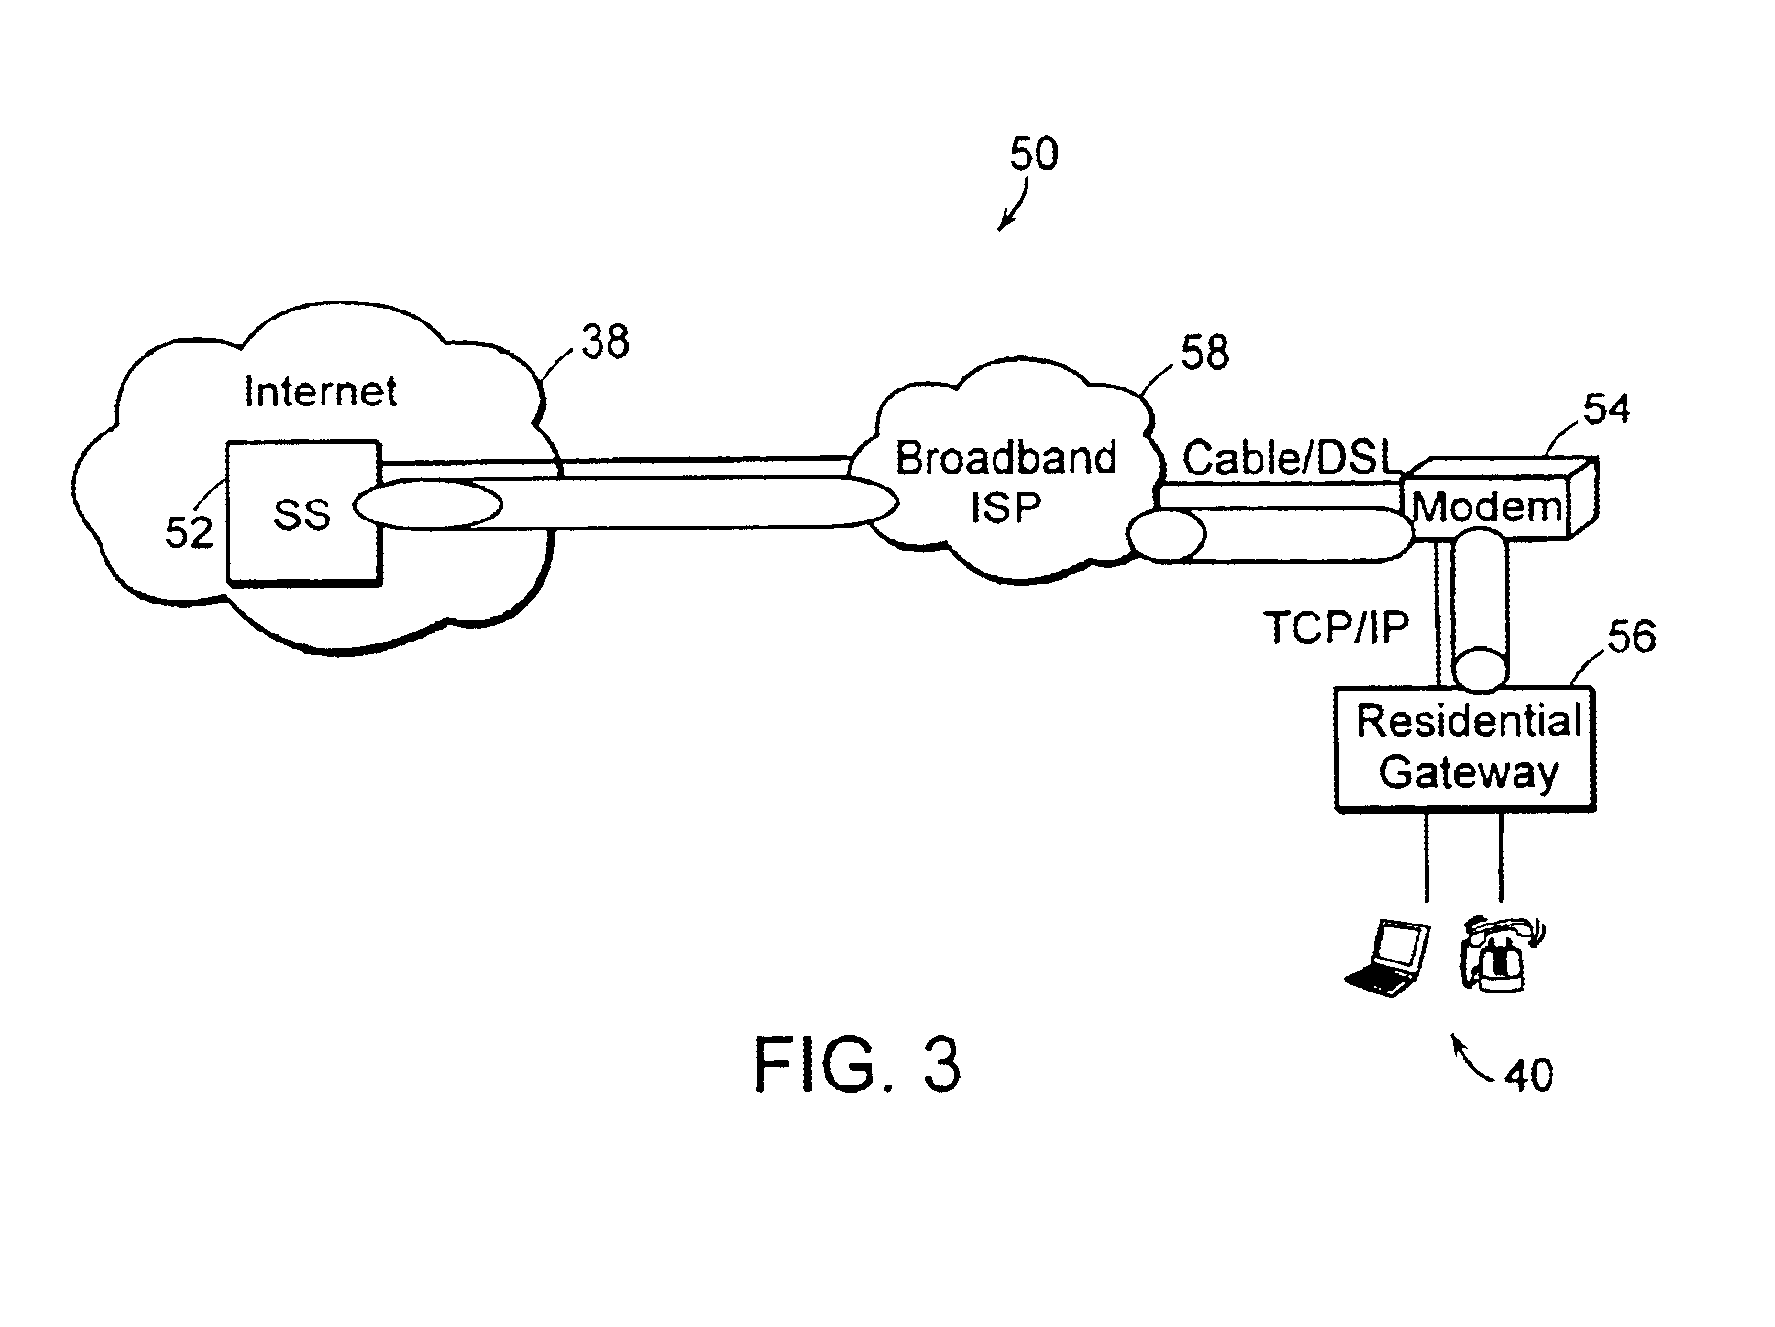 System and method to internetwork telecommunication networks of different protocols